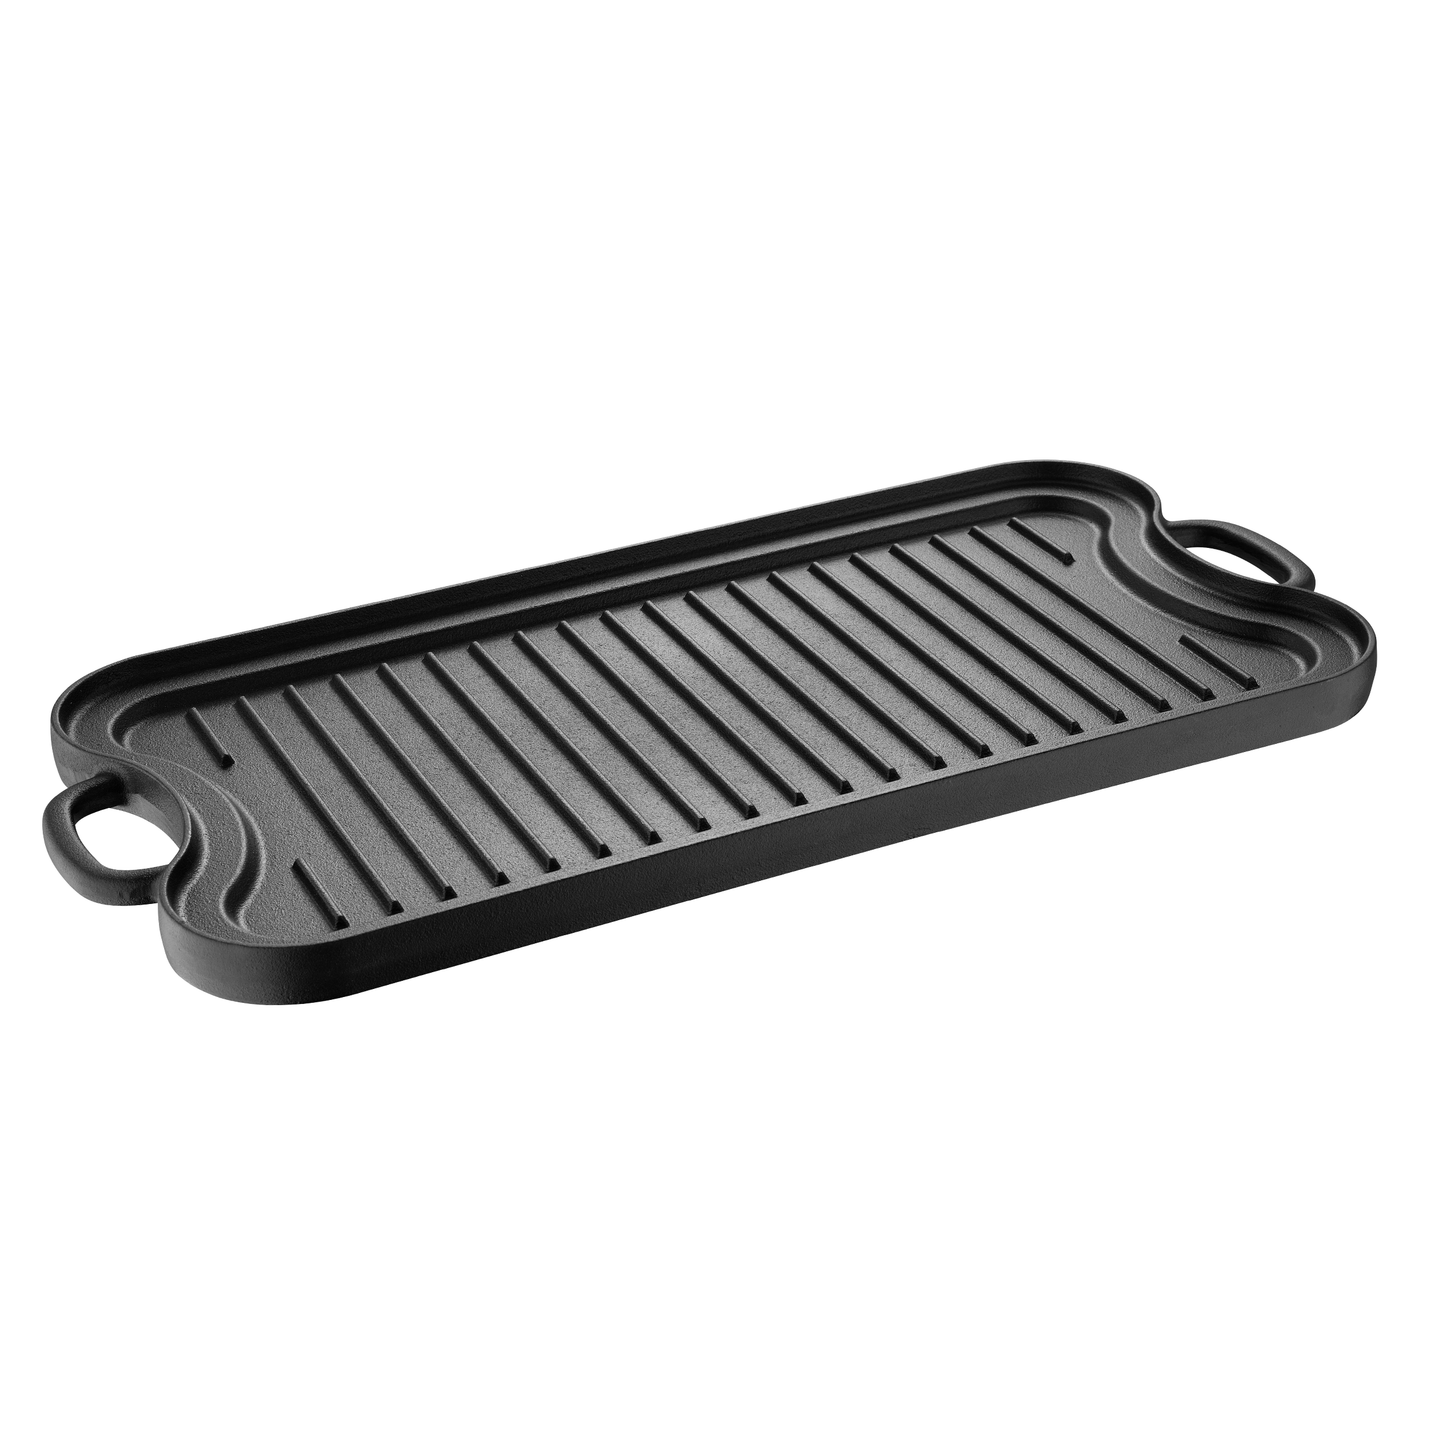 BBQ by MasterPRO - 20" x 10" Pre Seasoned Cast Iron Double Reversible Grill & Griddle